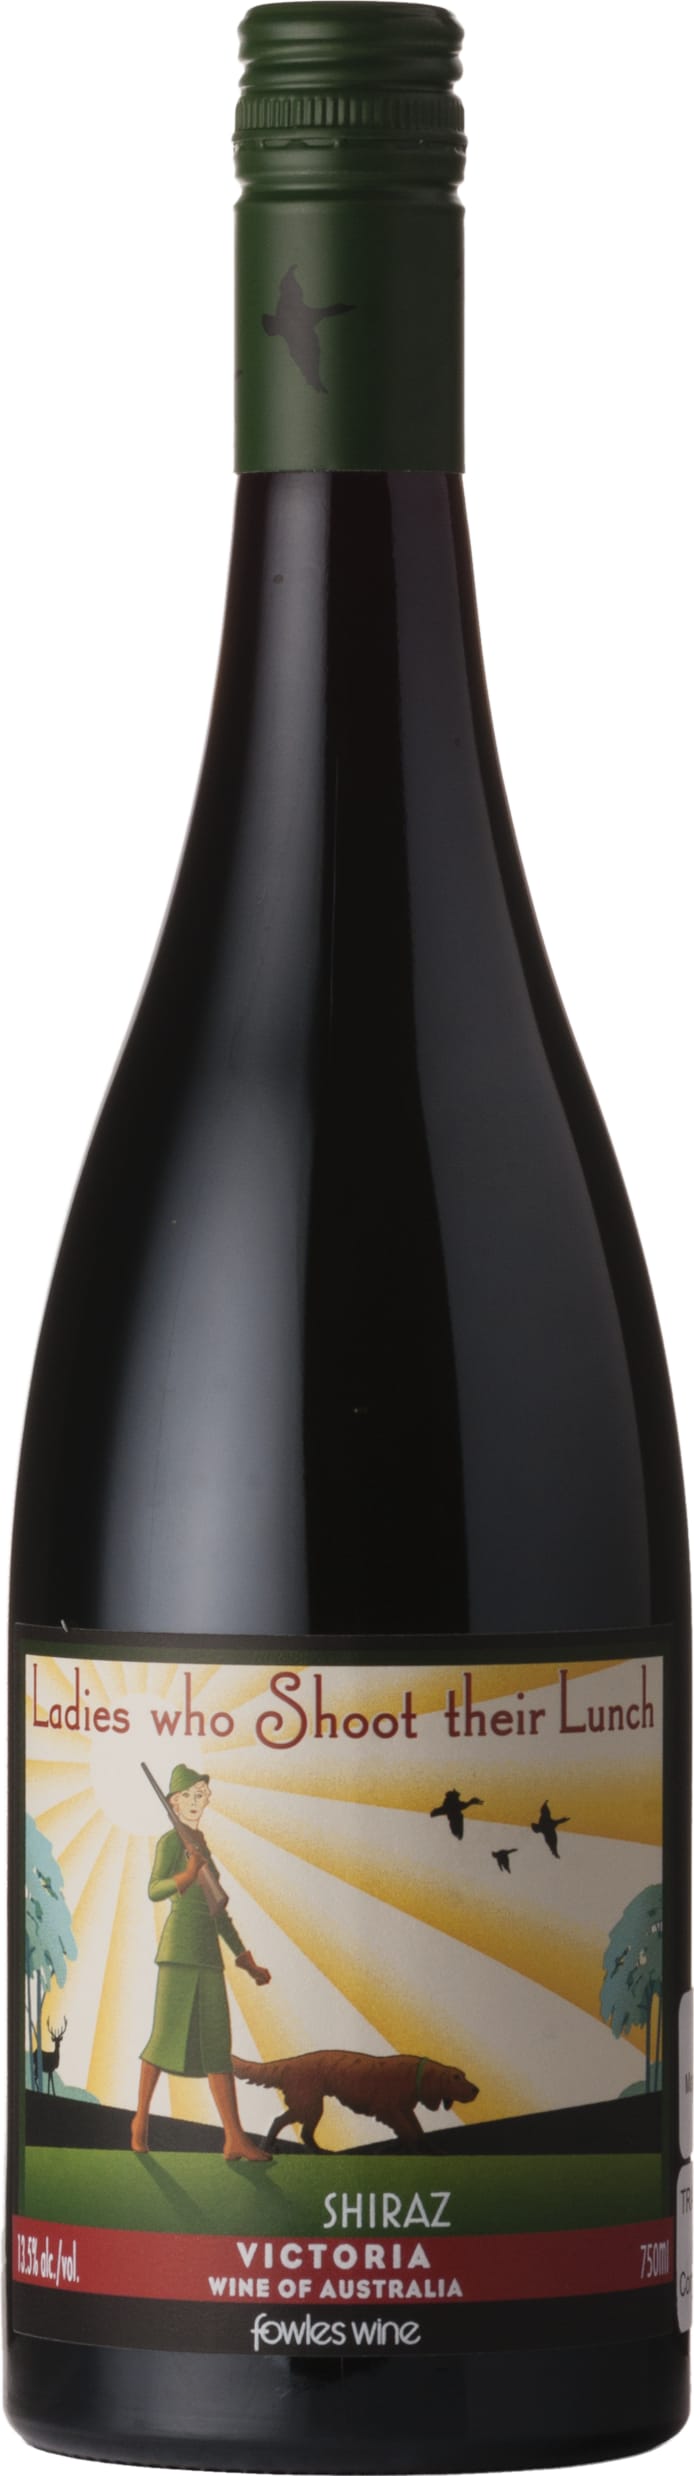 Fowles Wine Ladies Who Shoot Their Lunch Shiraz 2019 75cl - Buy Fowles Wine Wines from GREAT WINES DIRECT wine shop